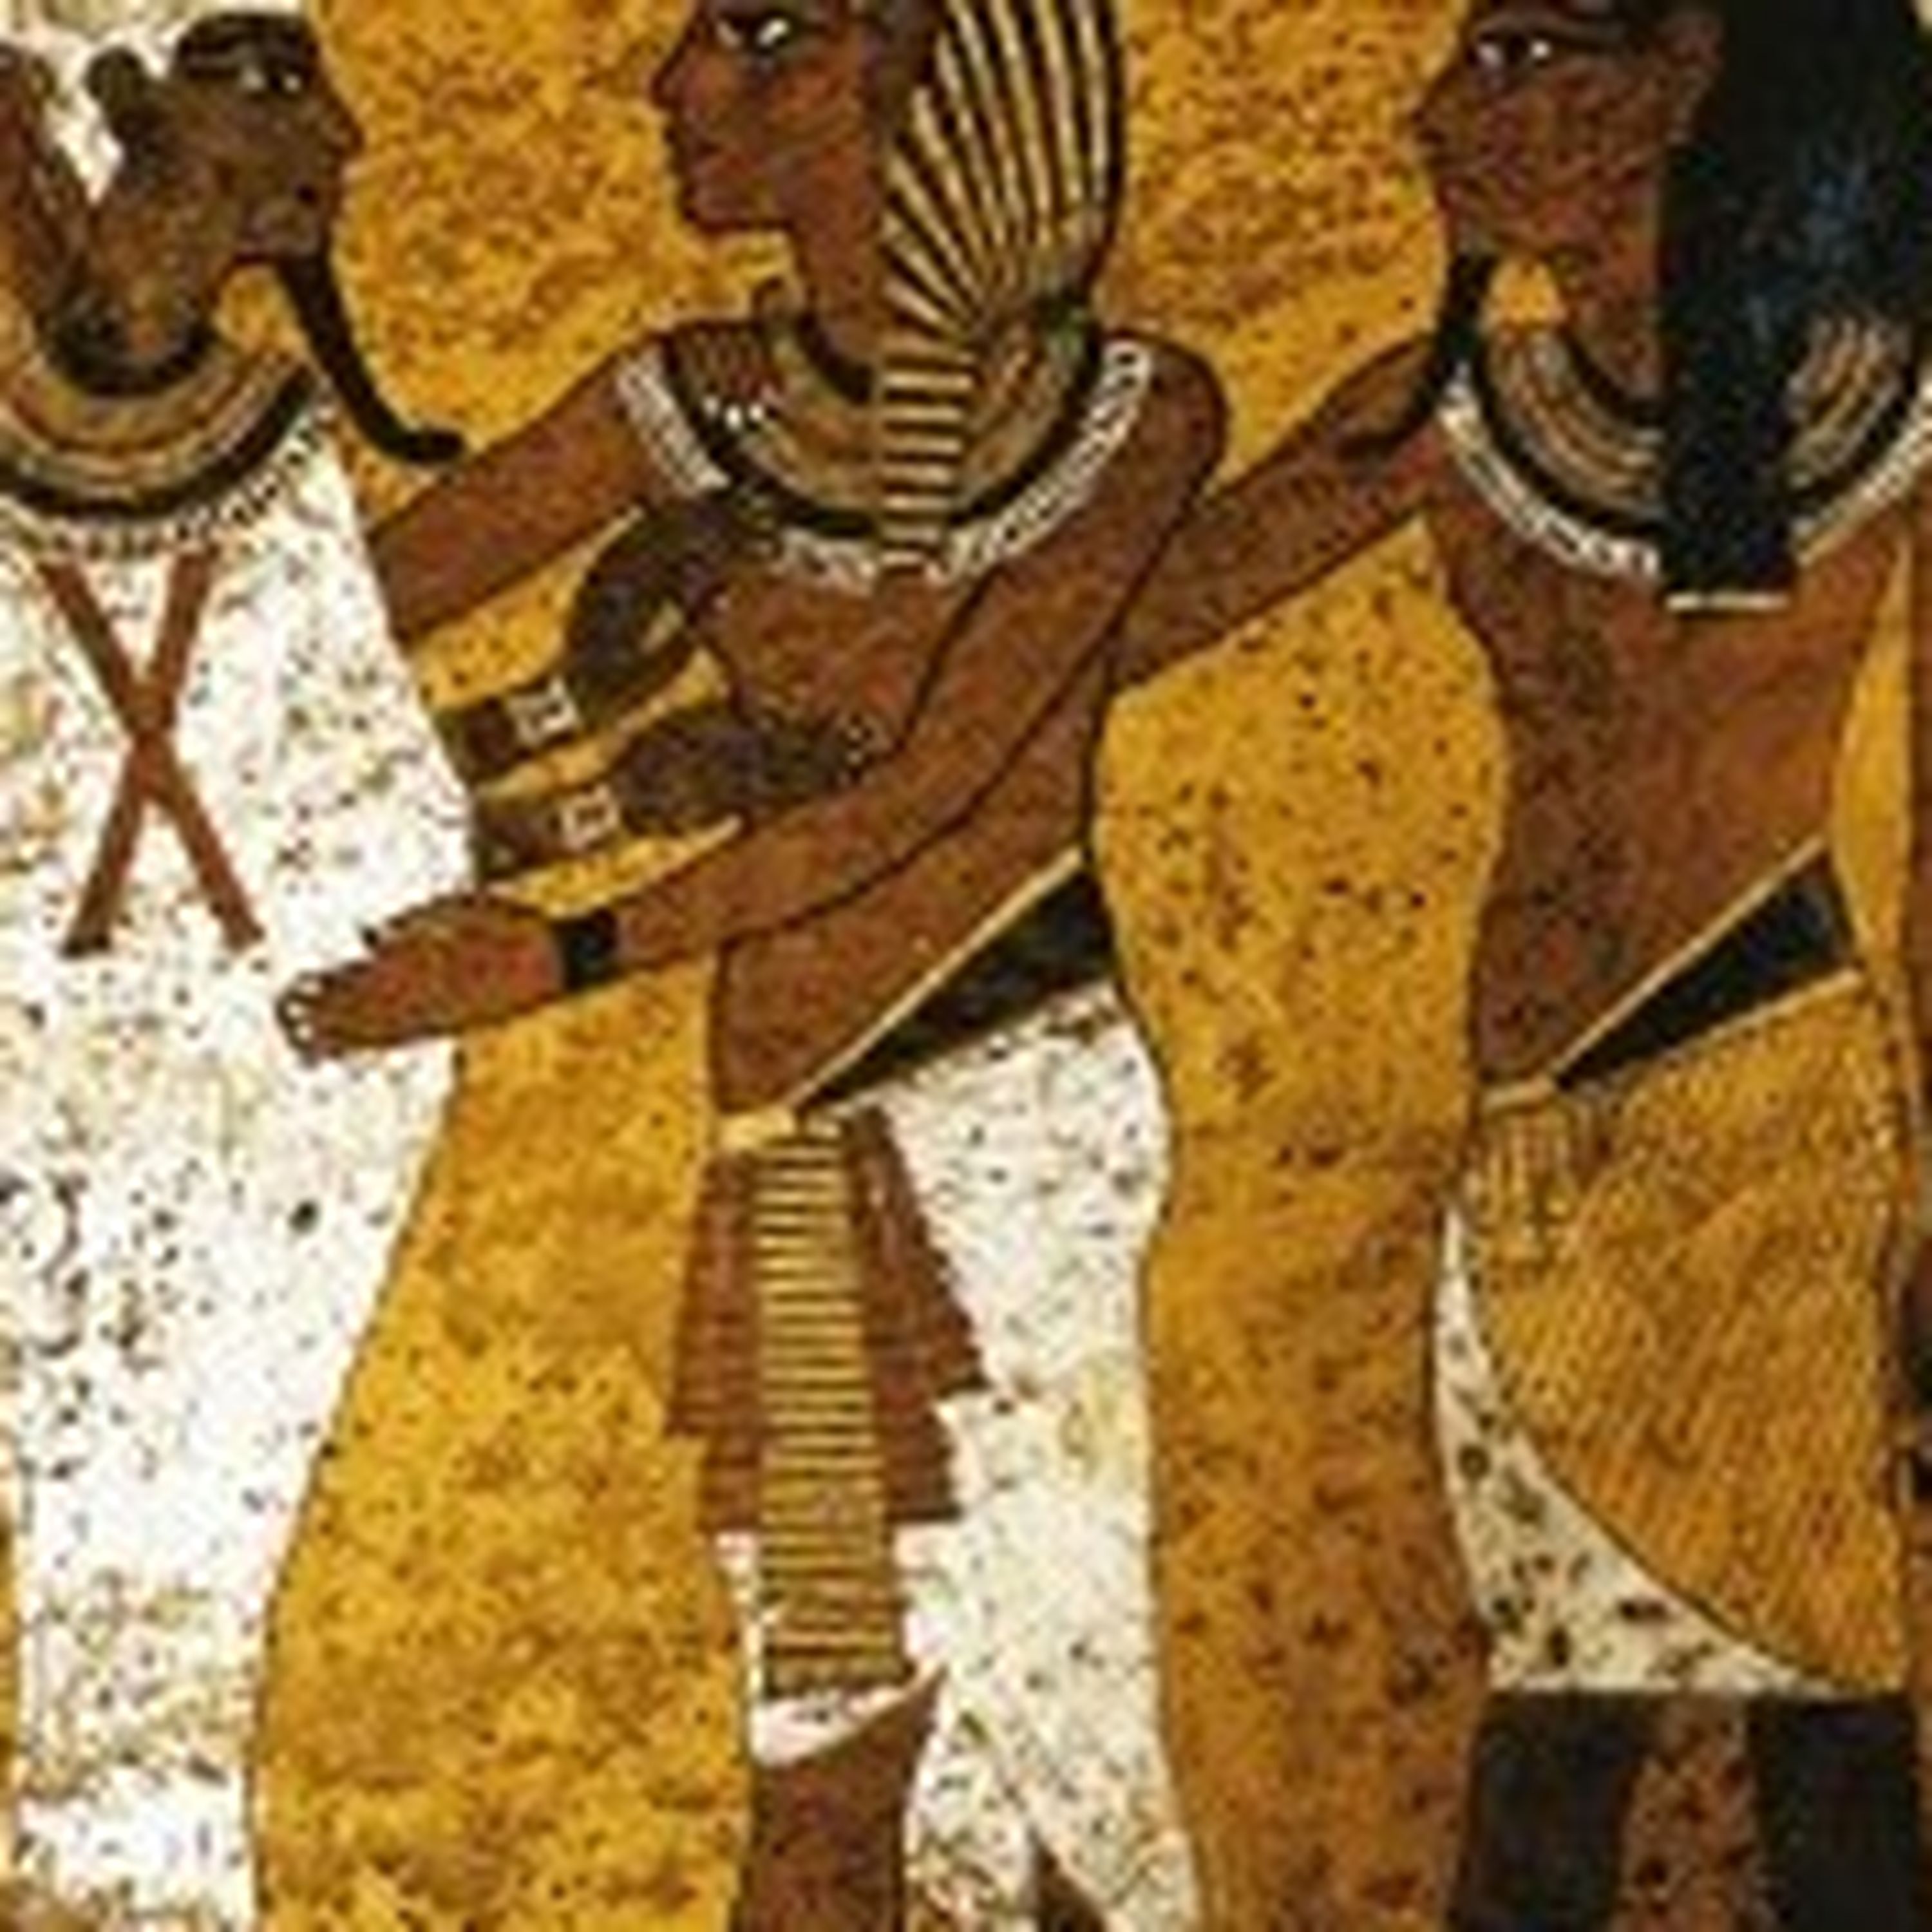 Episode35: The Pharao's Staff